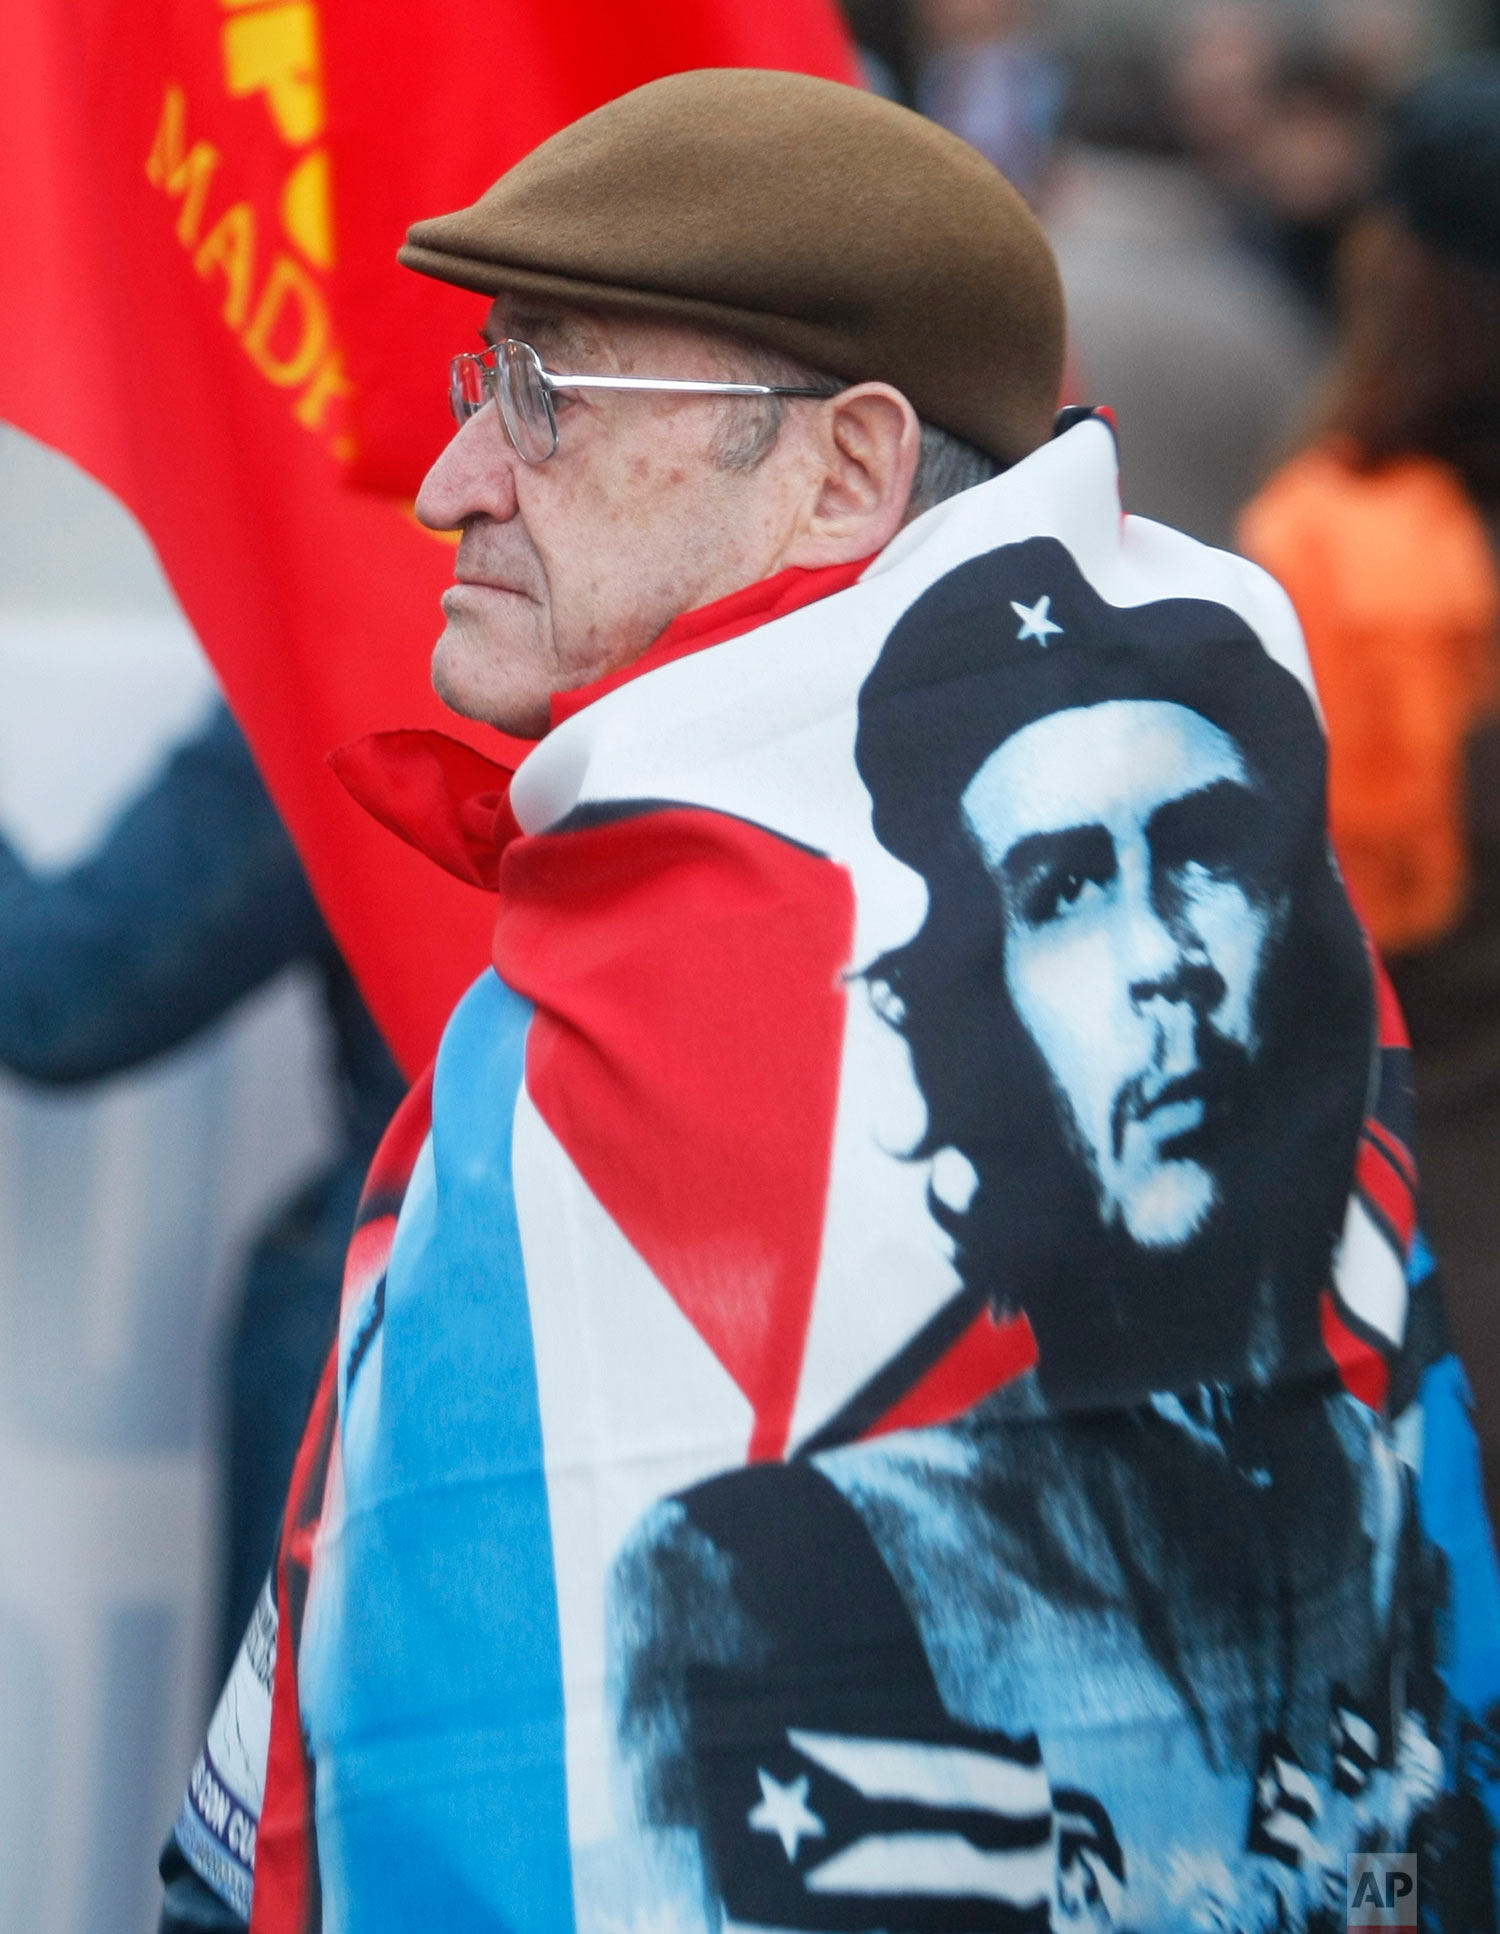  A demonstrator draped with a flag showing the face of Che Guevara, the legendary guerrilla and revolutionary icon, marches in Madrid Saturday Jan. 31, 2009  to mark the the 50th Anniversary of the Cuban Revolution. (AP Photo/Paul White) 